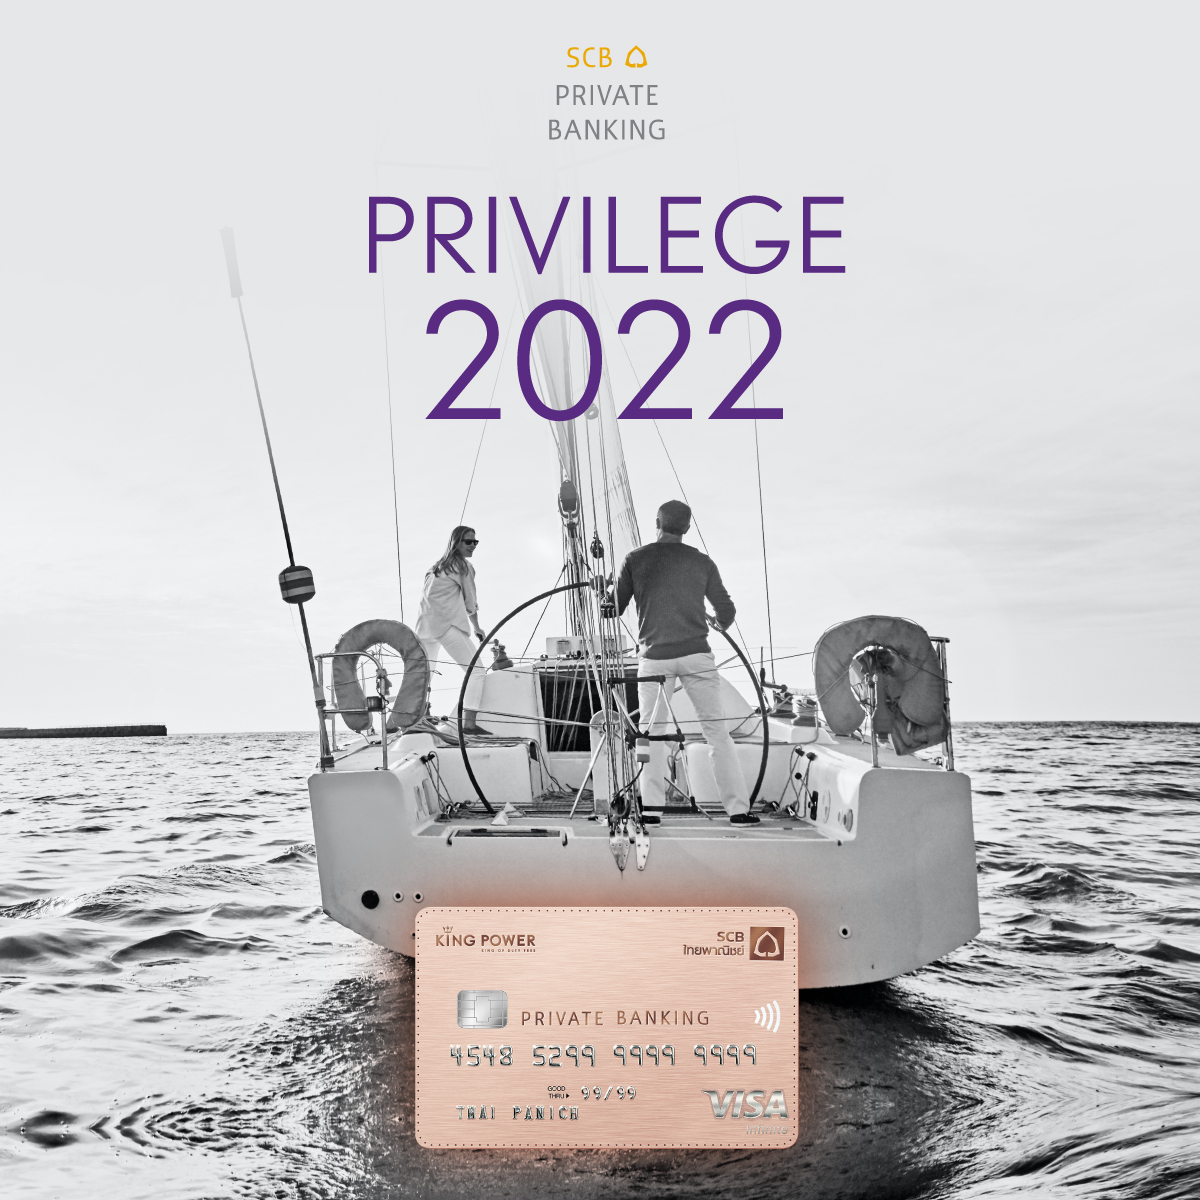 New SCB Private Banking Privileges 2022 (ฉบับภาษาไทย)